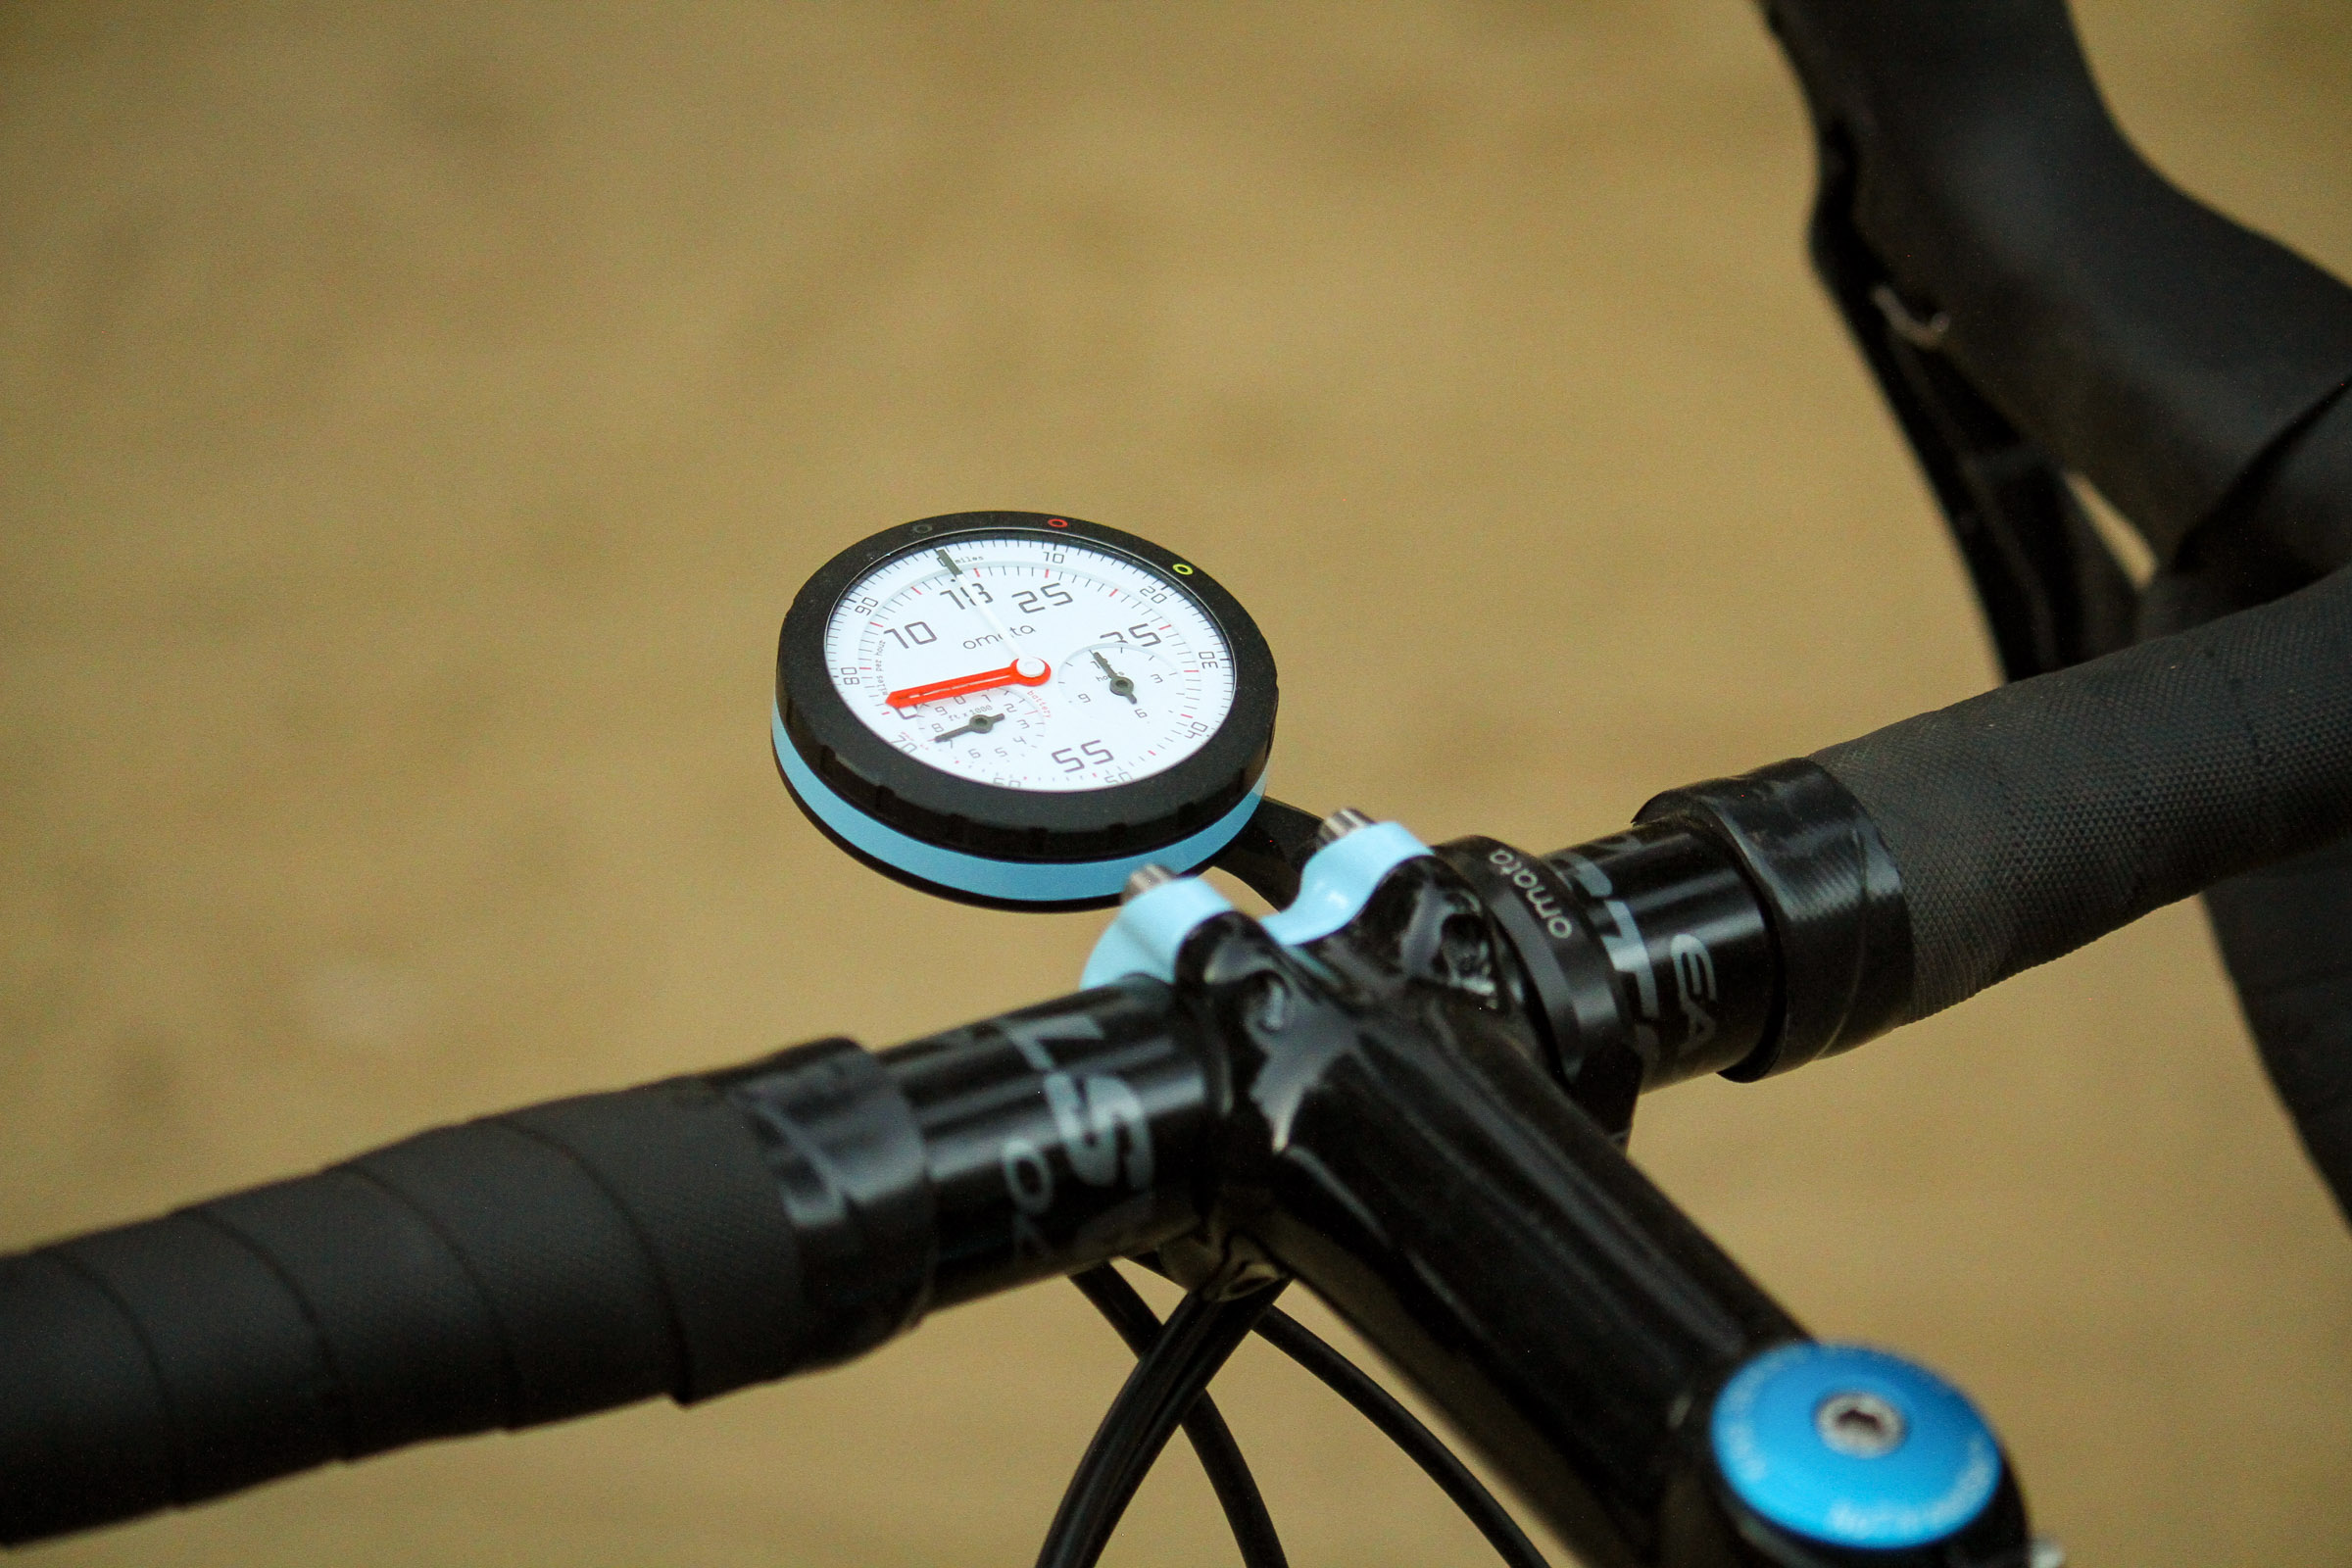 speedometer for bicycle